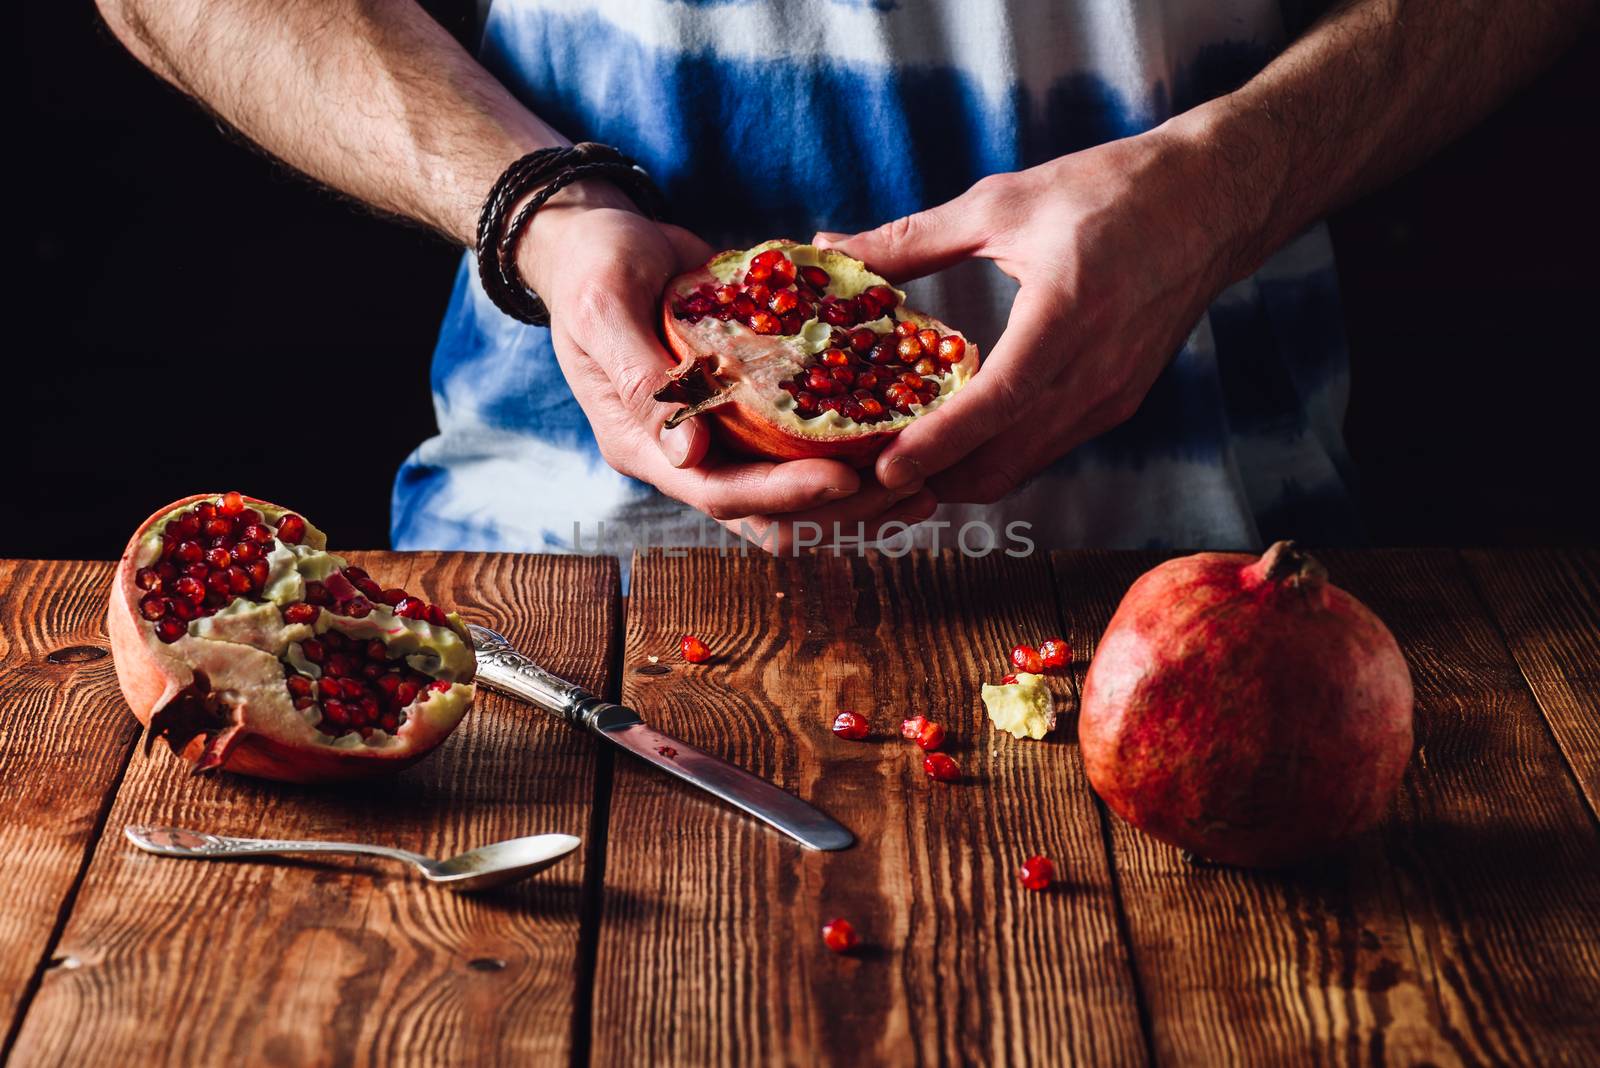 Pomegranate Half in the Hands and Other Half on Wooden Table with Knife.